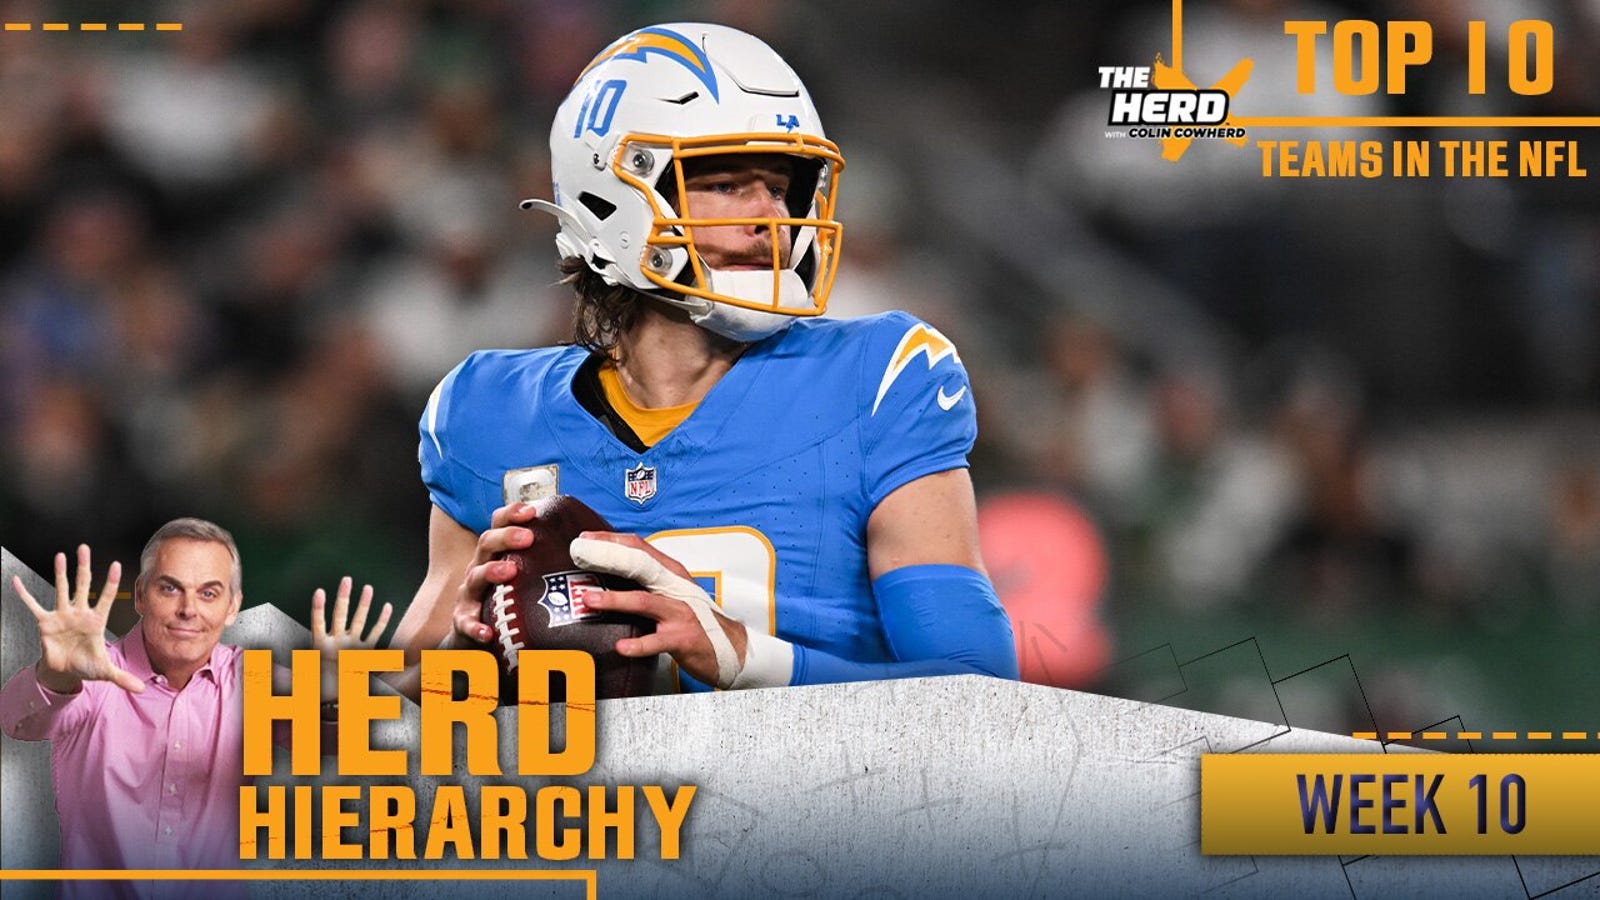 Herd Hierarchy: Chargers return, Ravens remain at top